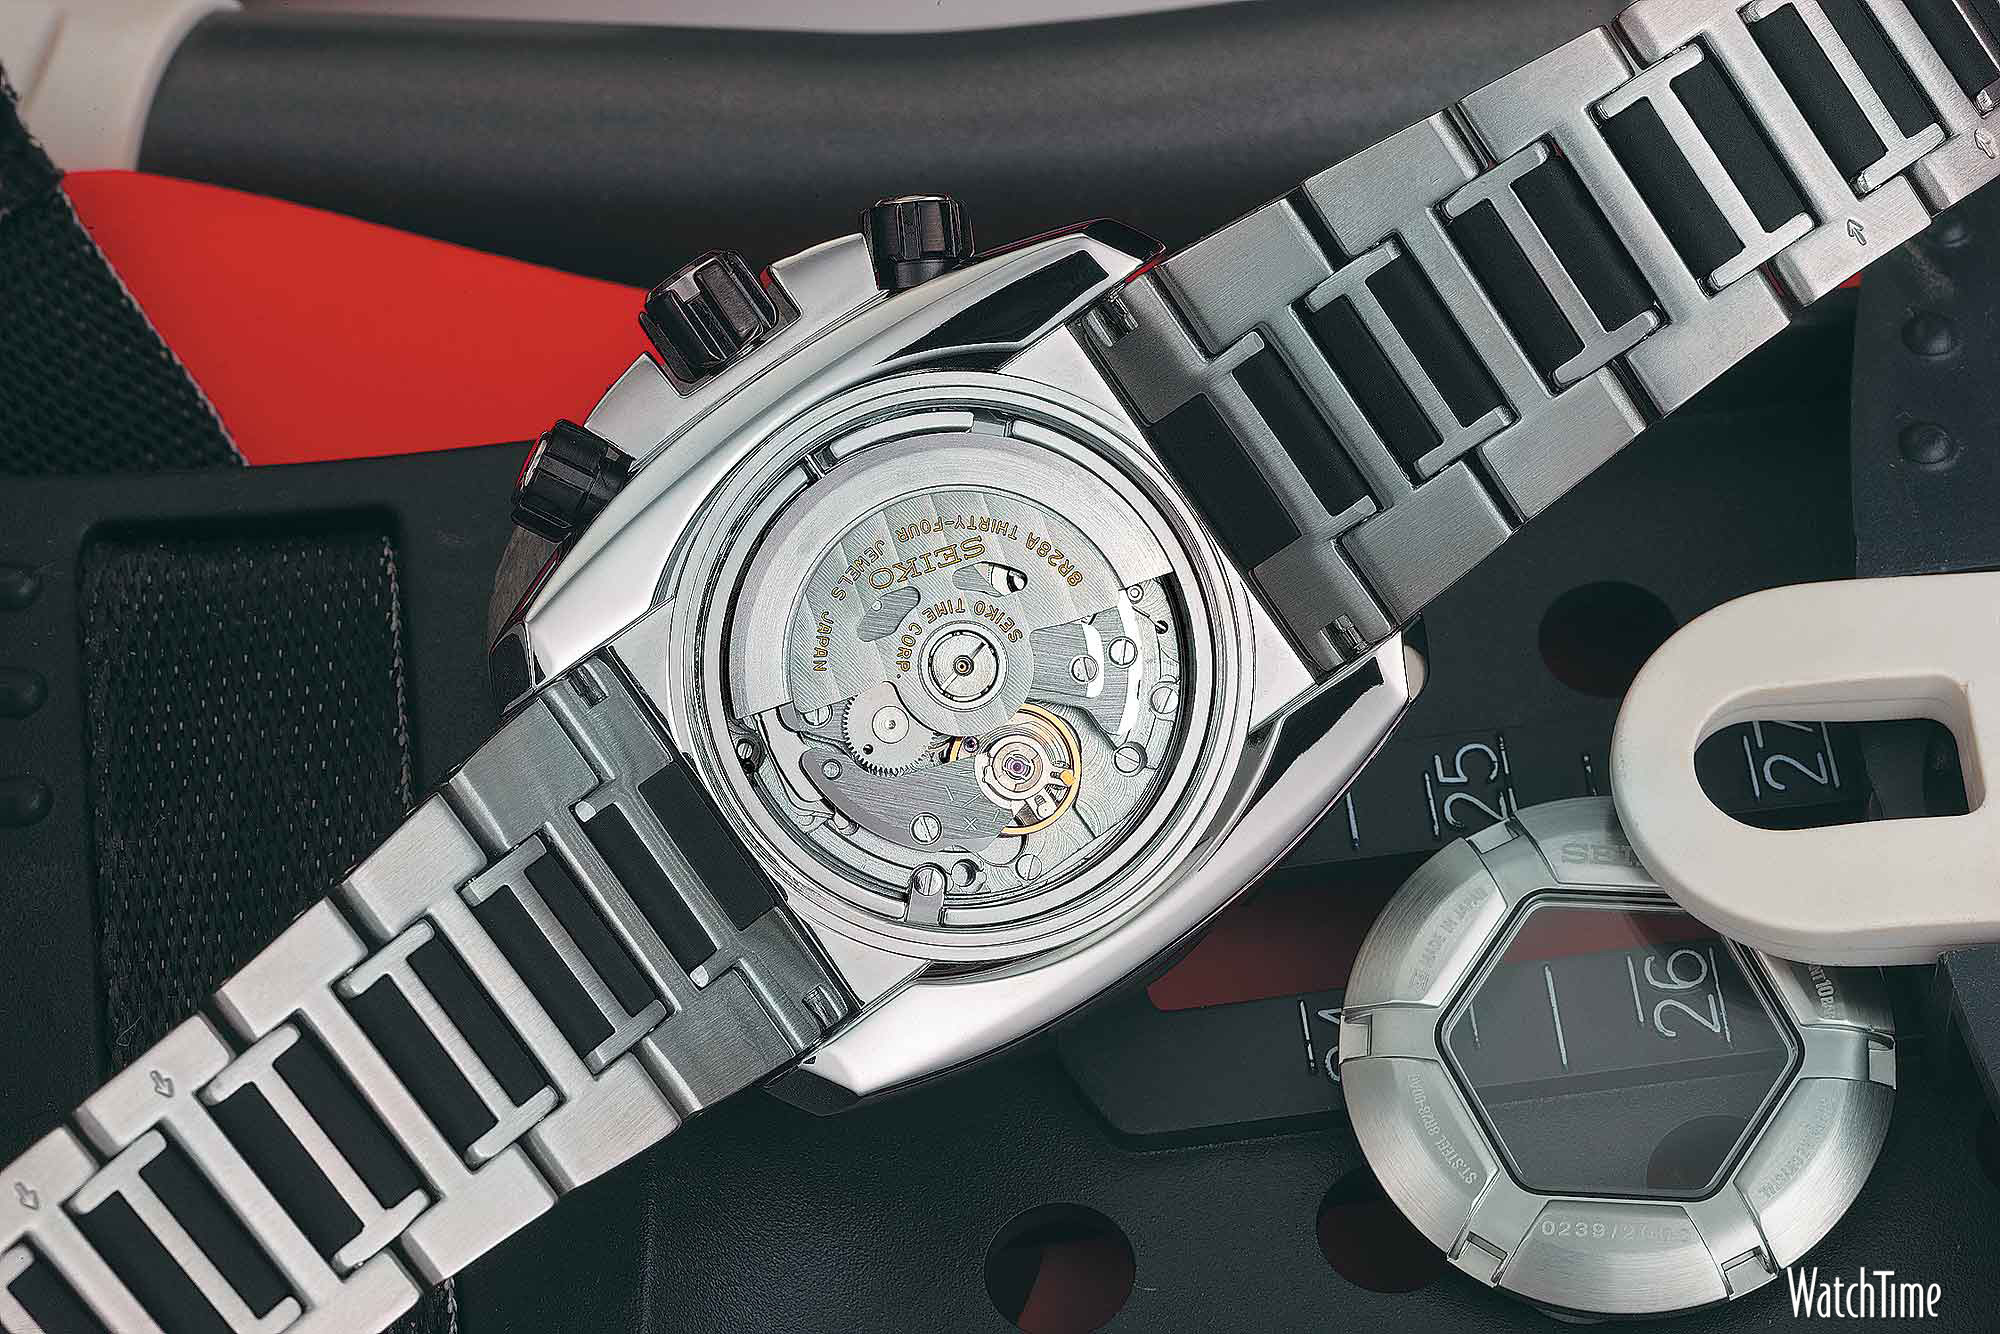 Clutch Performer: Reviewing Velatura | WatchTime - USA's No.1 Watch Magazine